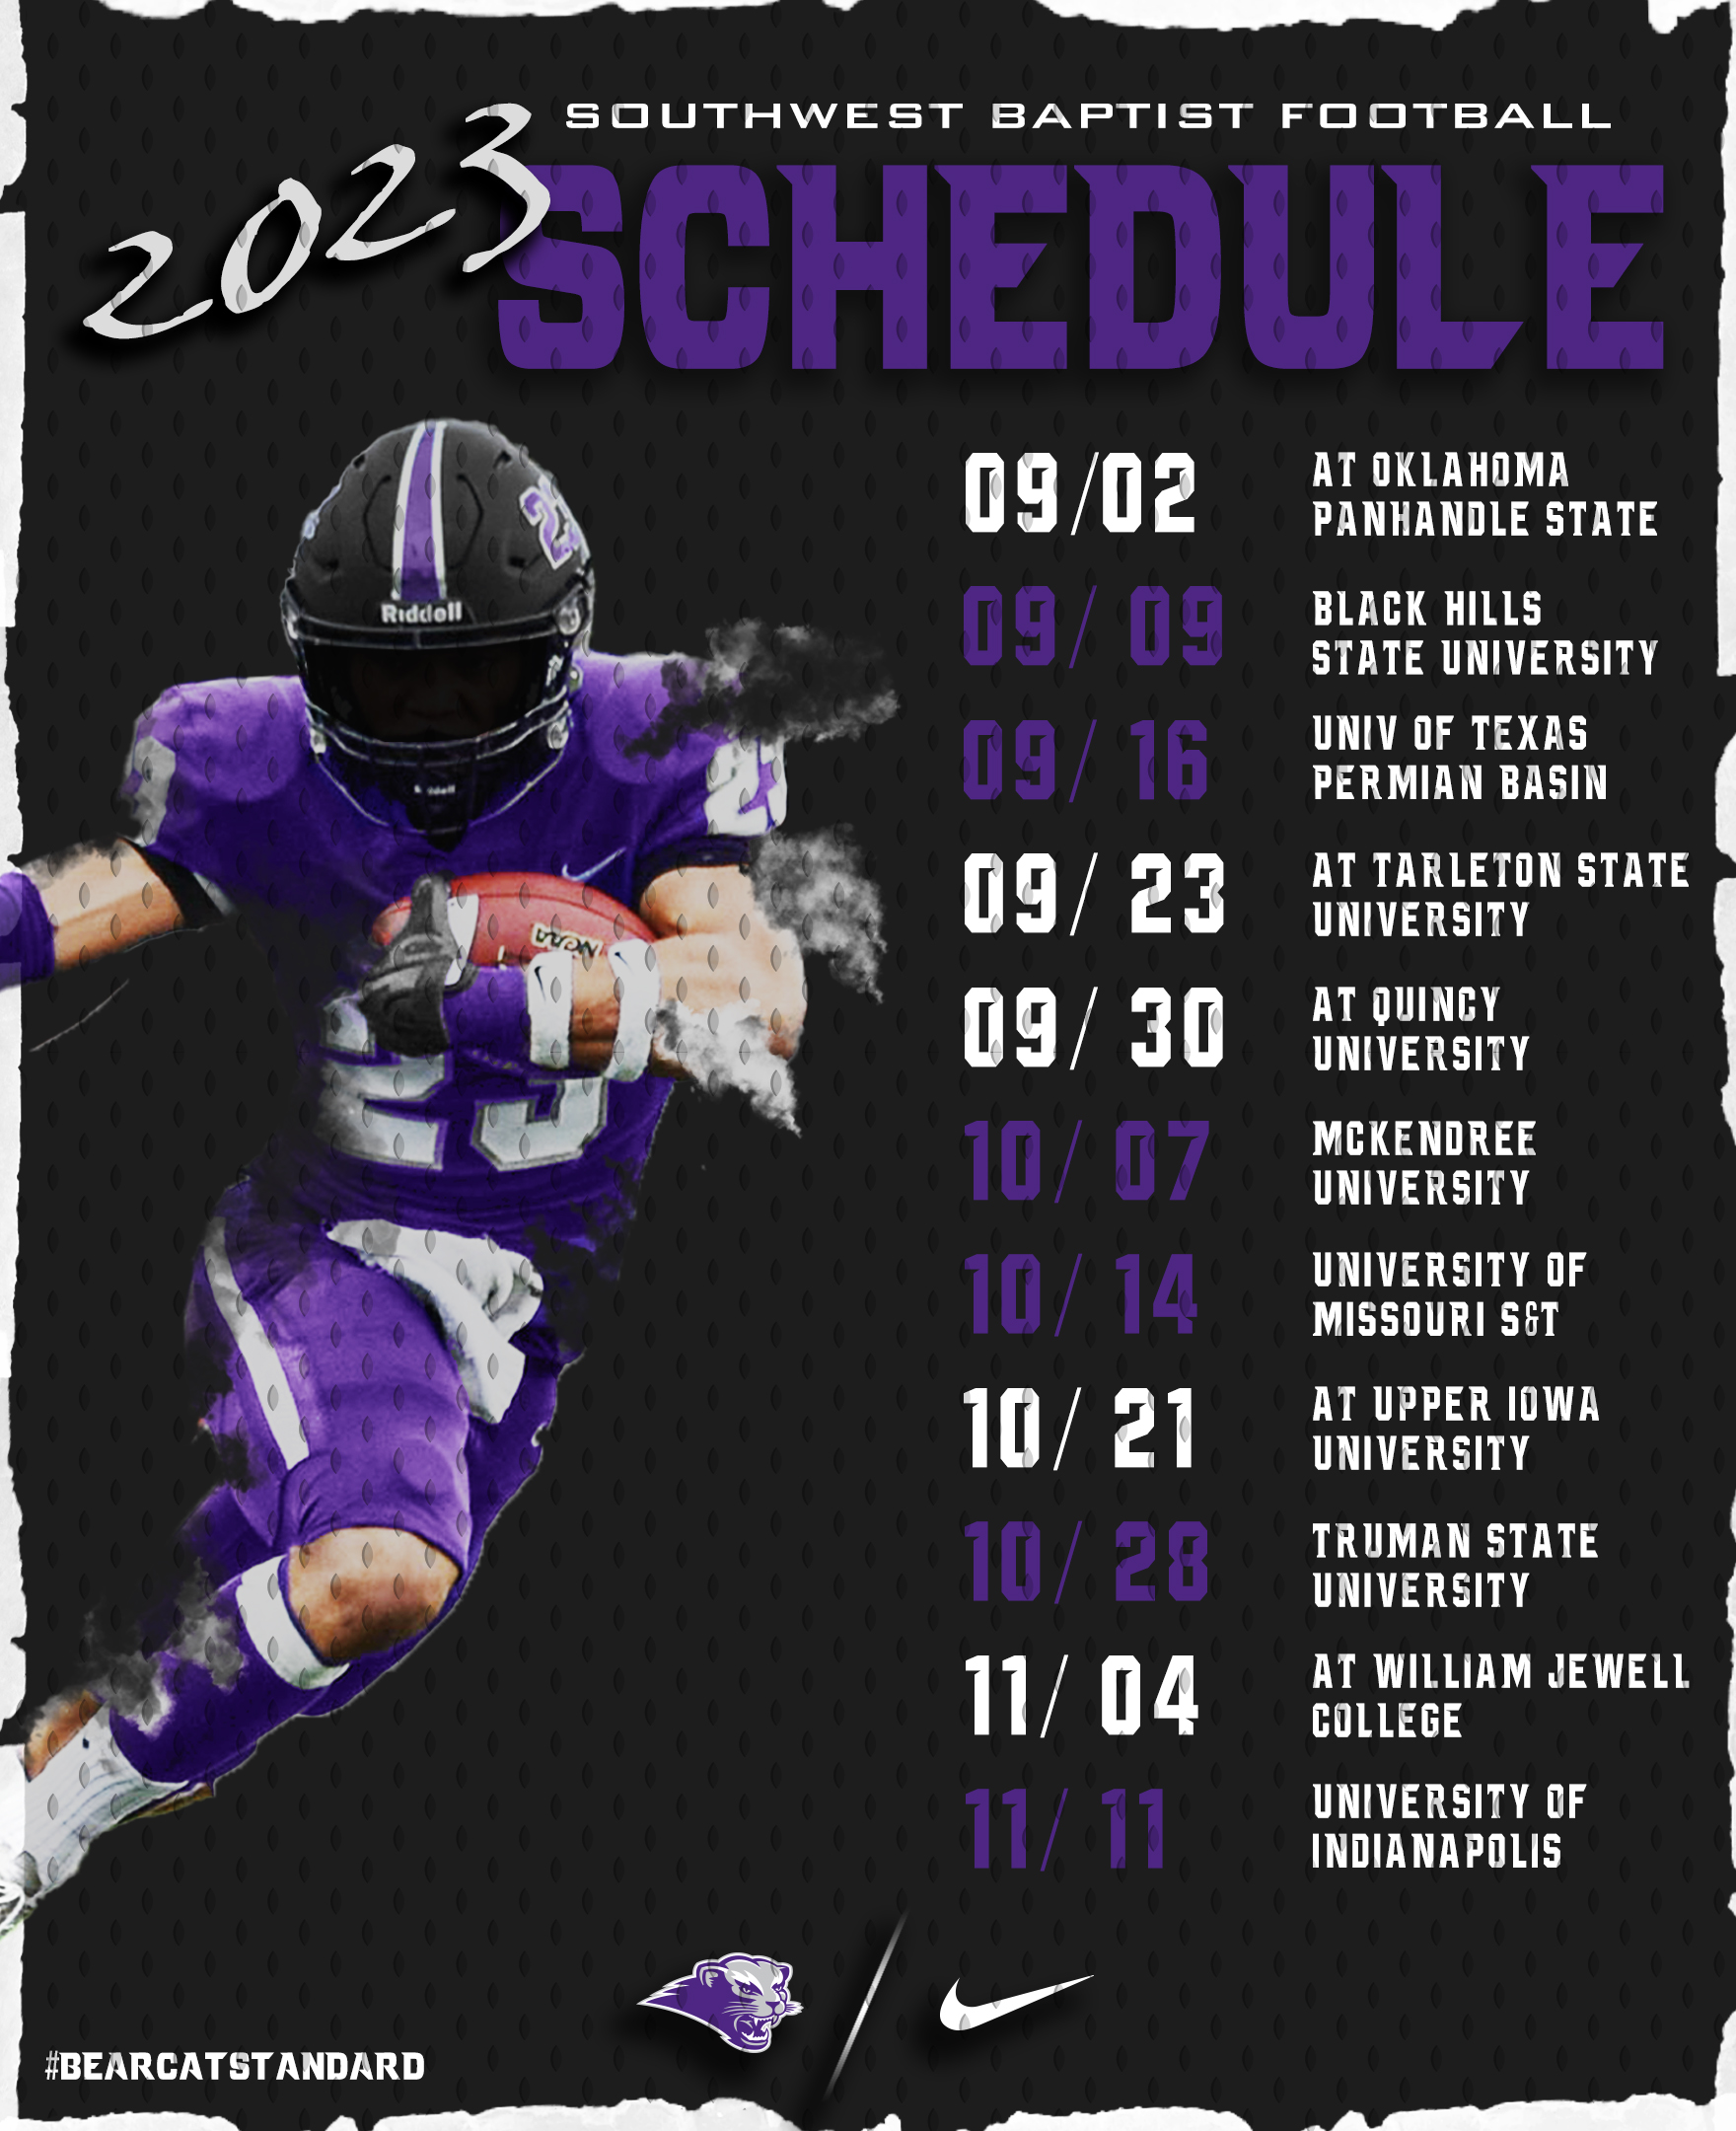 SBU Football on Twitter "👀2023 Schedule Update! Now have an 11game